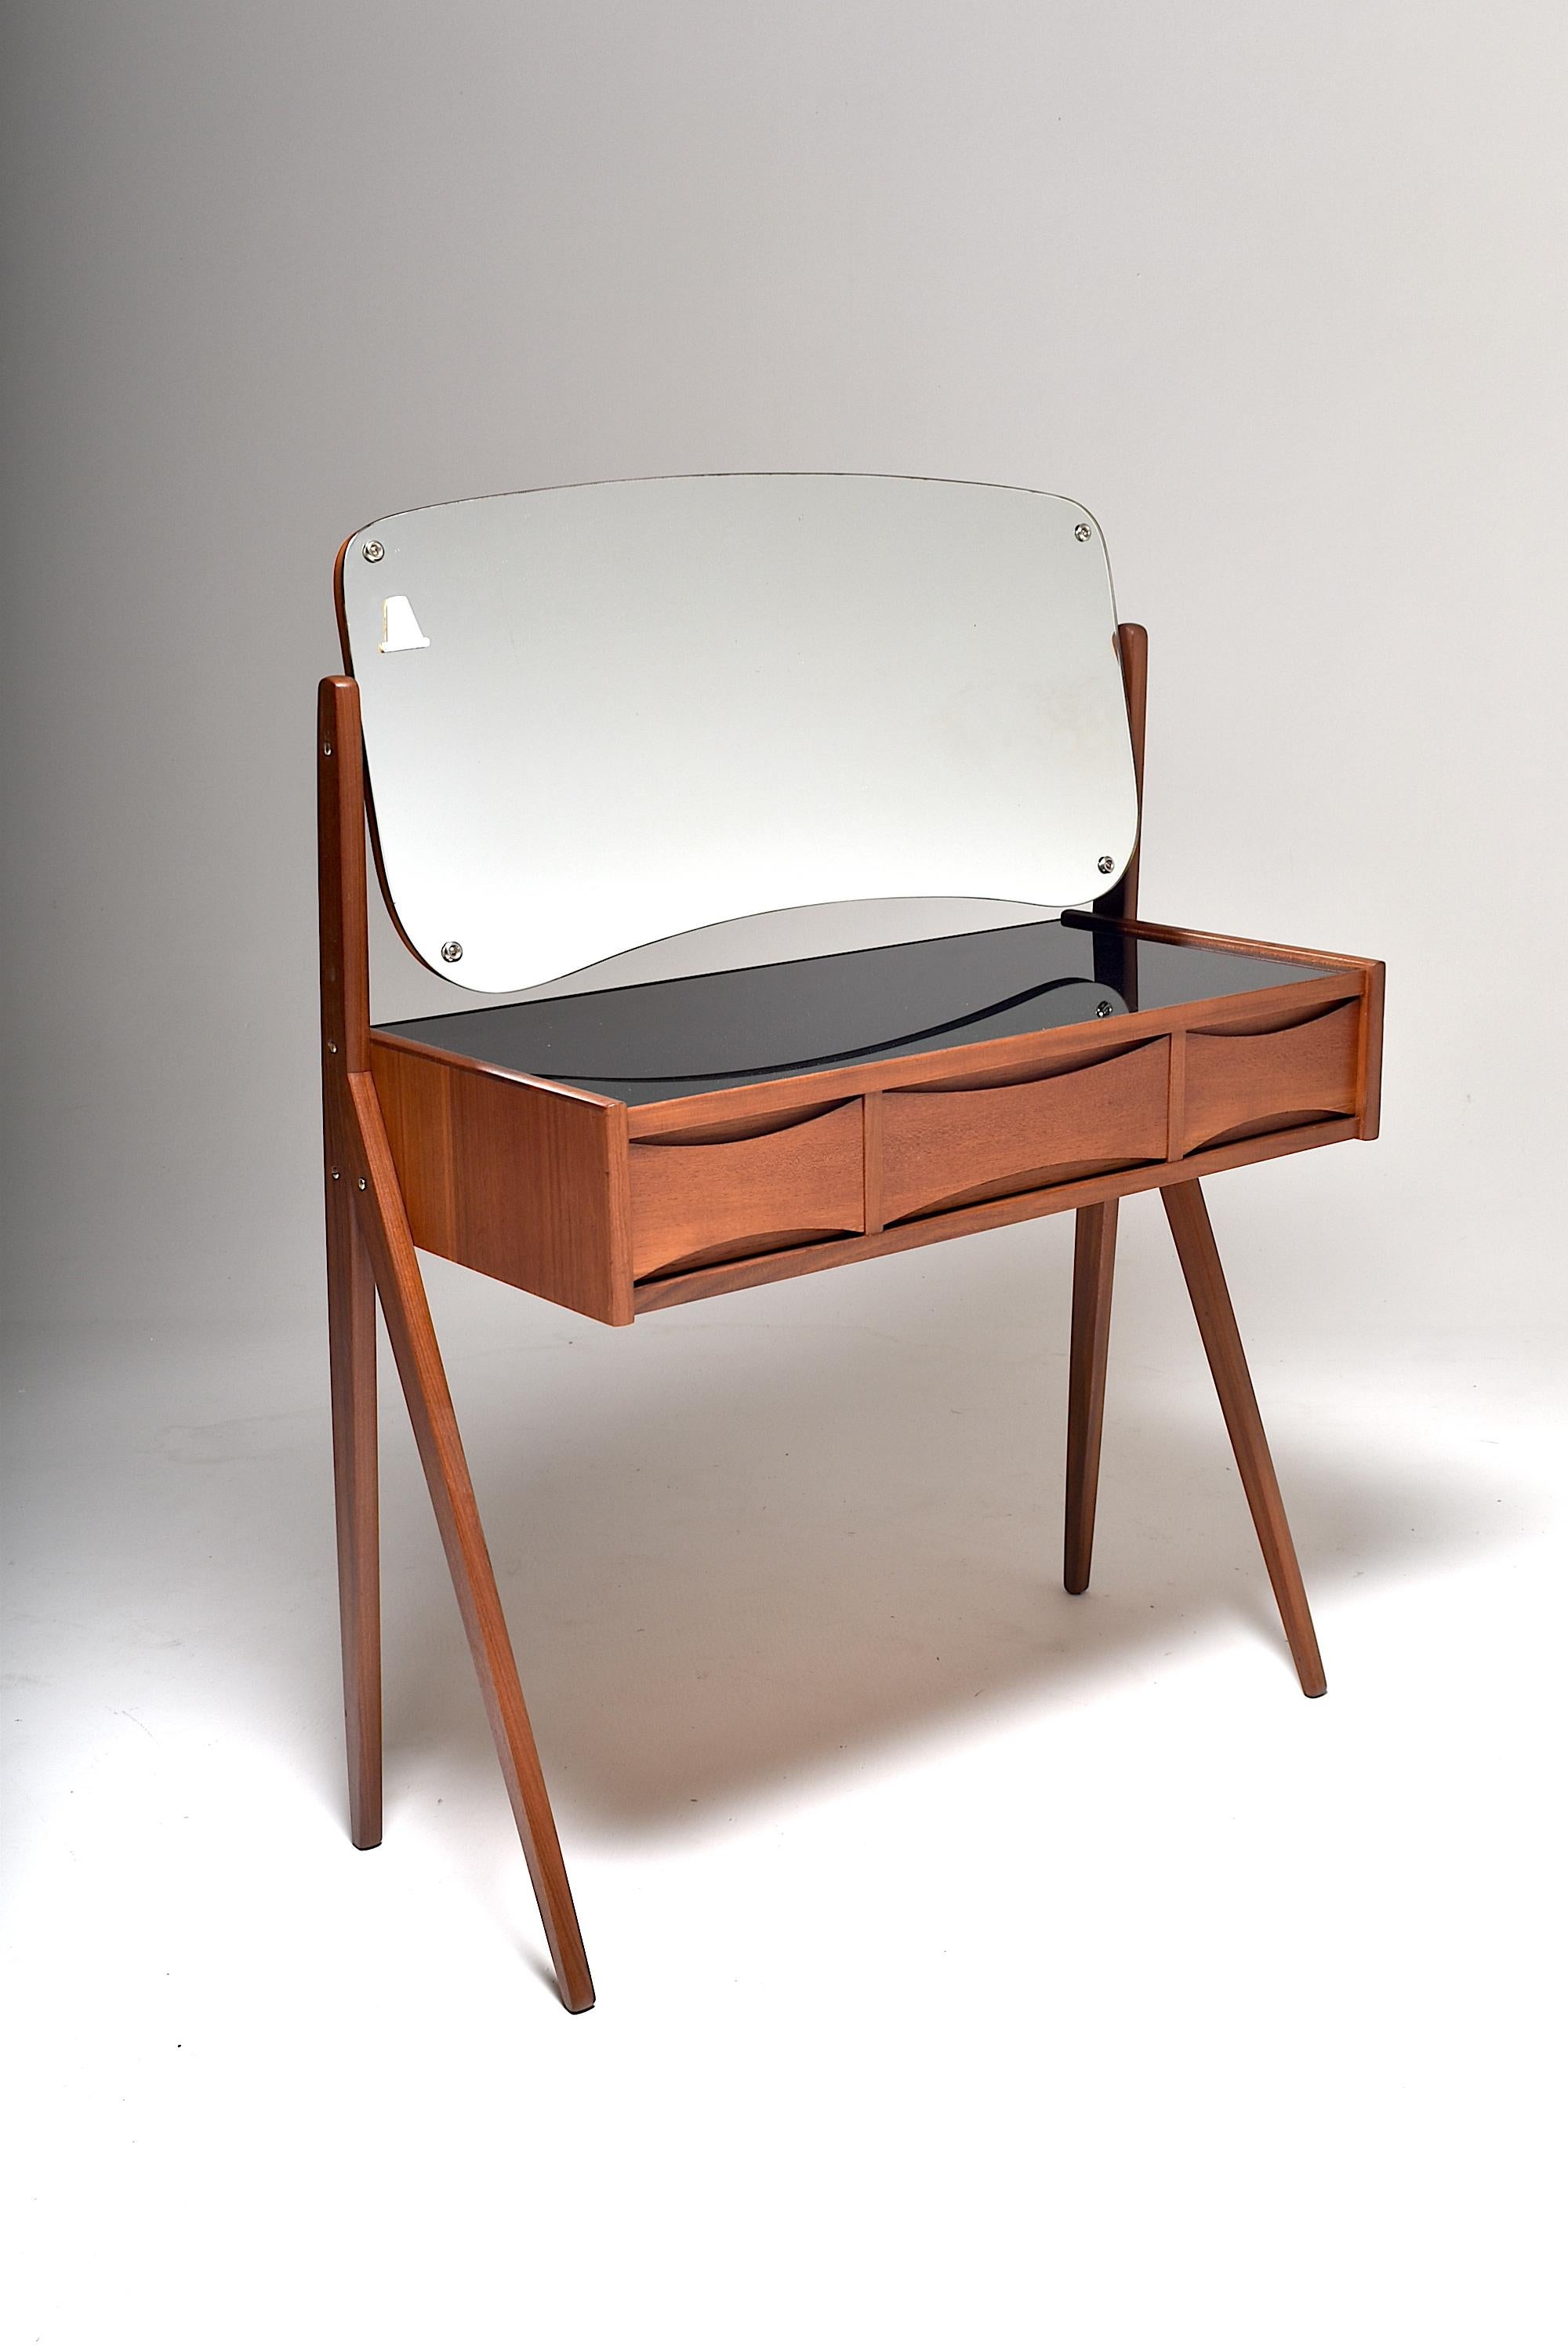 Scandinavian vanity table, elegant and refined, designed by Arne Vodder and made in teak by Olholm Möbelfabrik, Denmark, 1960. 
The handles of the drawers are in the shape of a butterfly.
Compass feet fixed